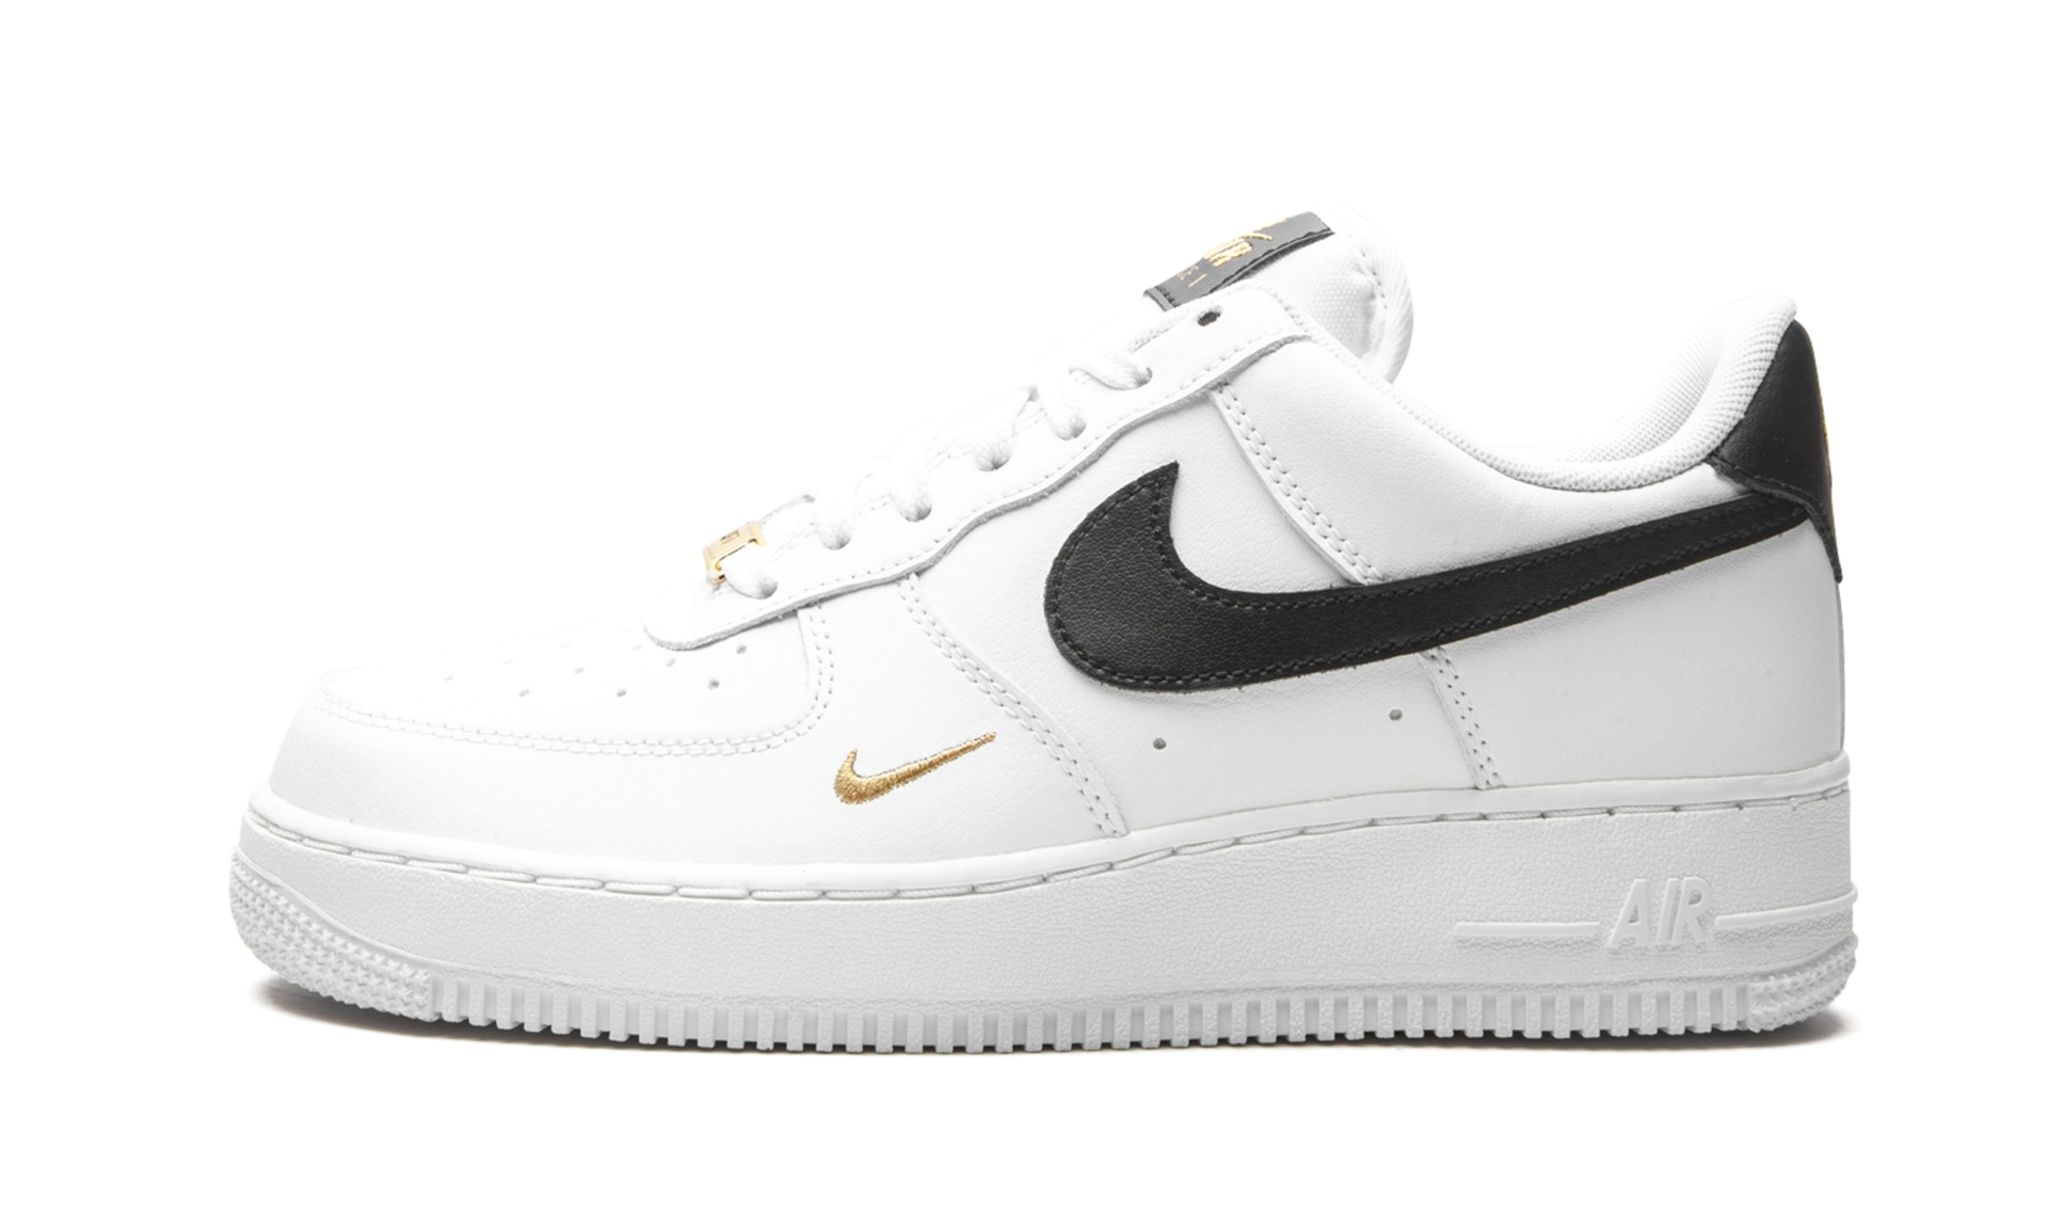 WMNS Air Force 1 Low Essential "White / Black / Gold" - 1